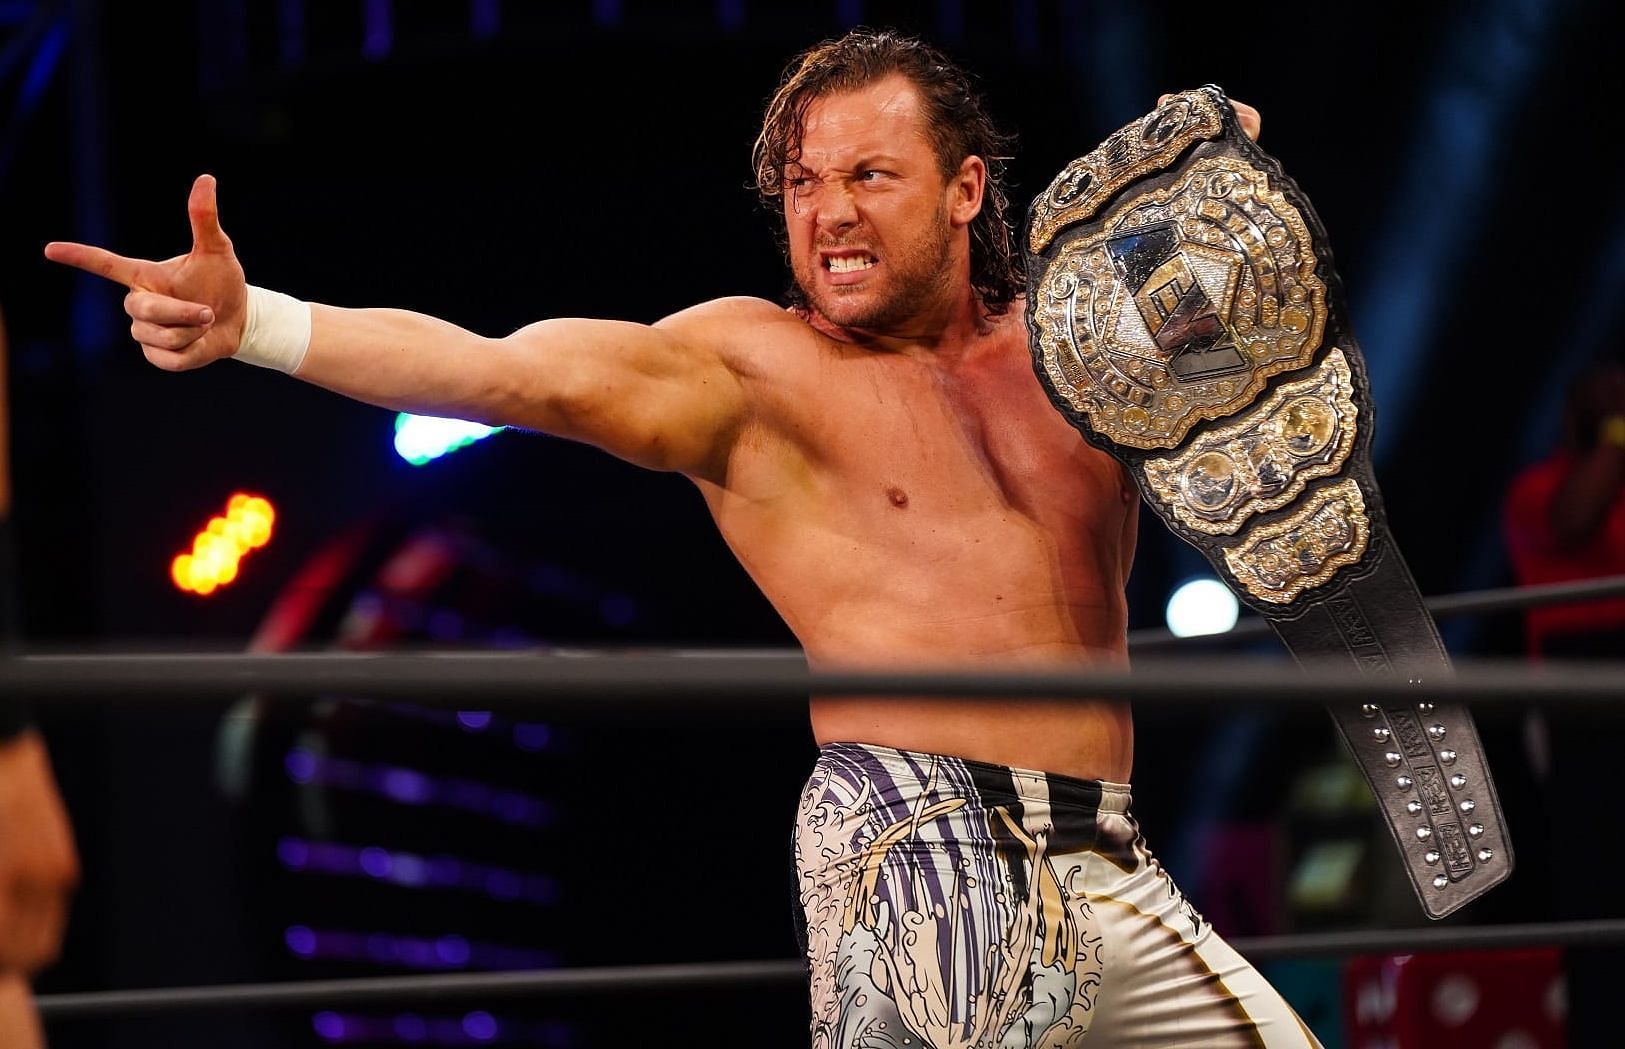 Kenny Omega is a former World Champion